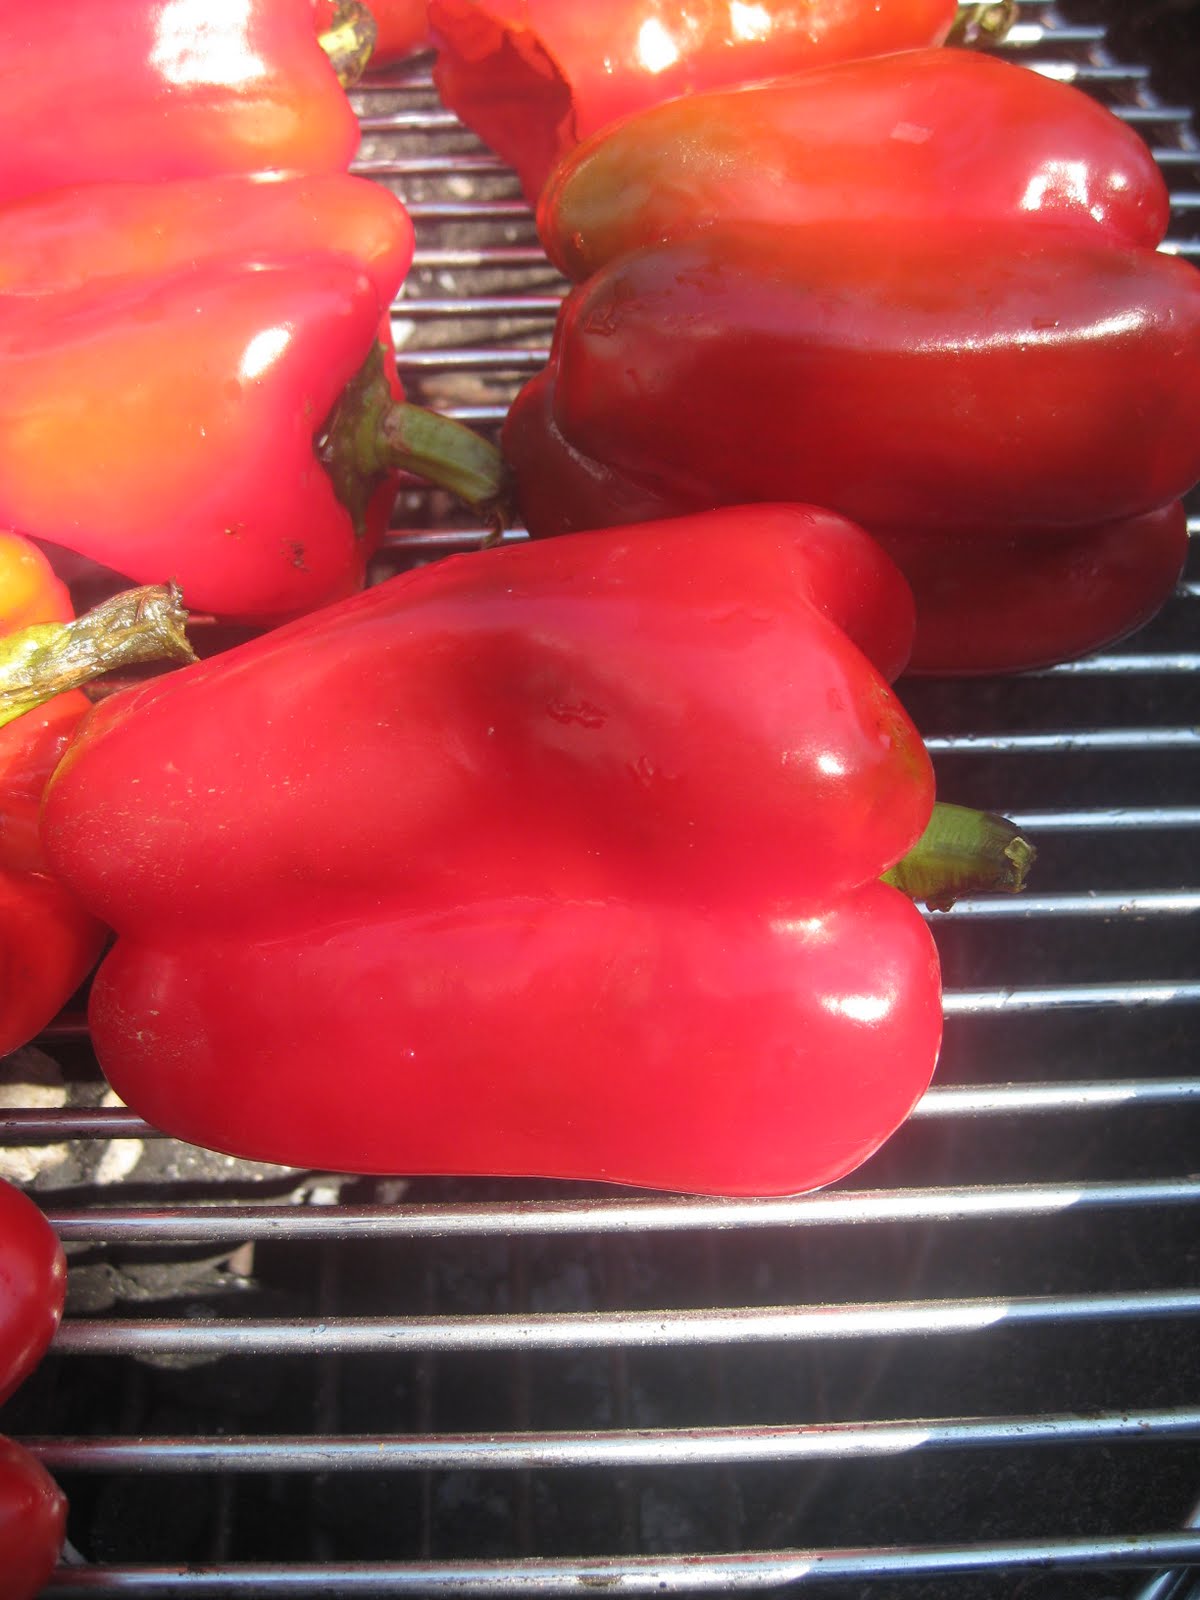 Food Snobbery is my Hobbery: Roasted Red Peppers Galore!